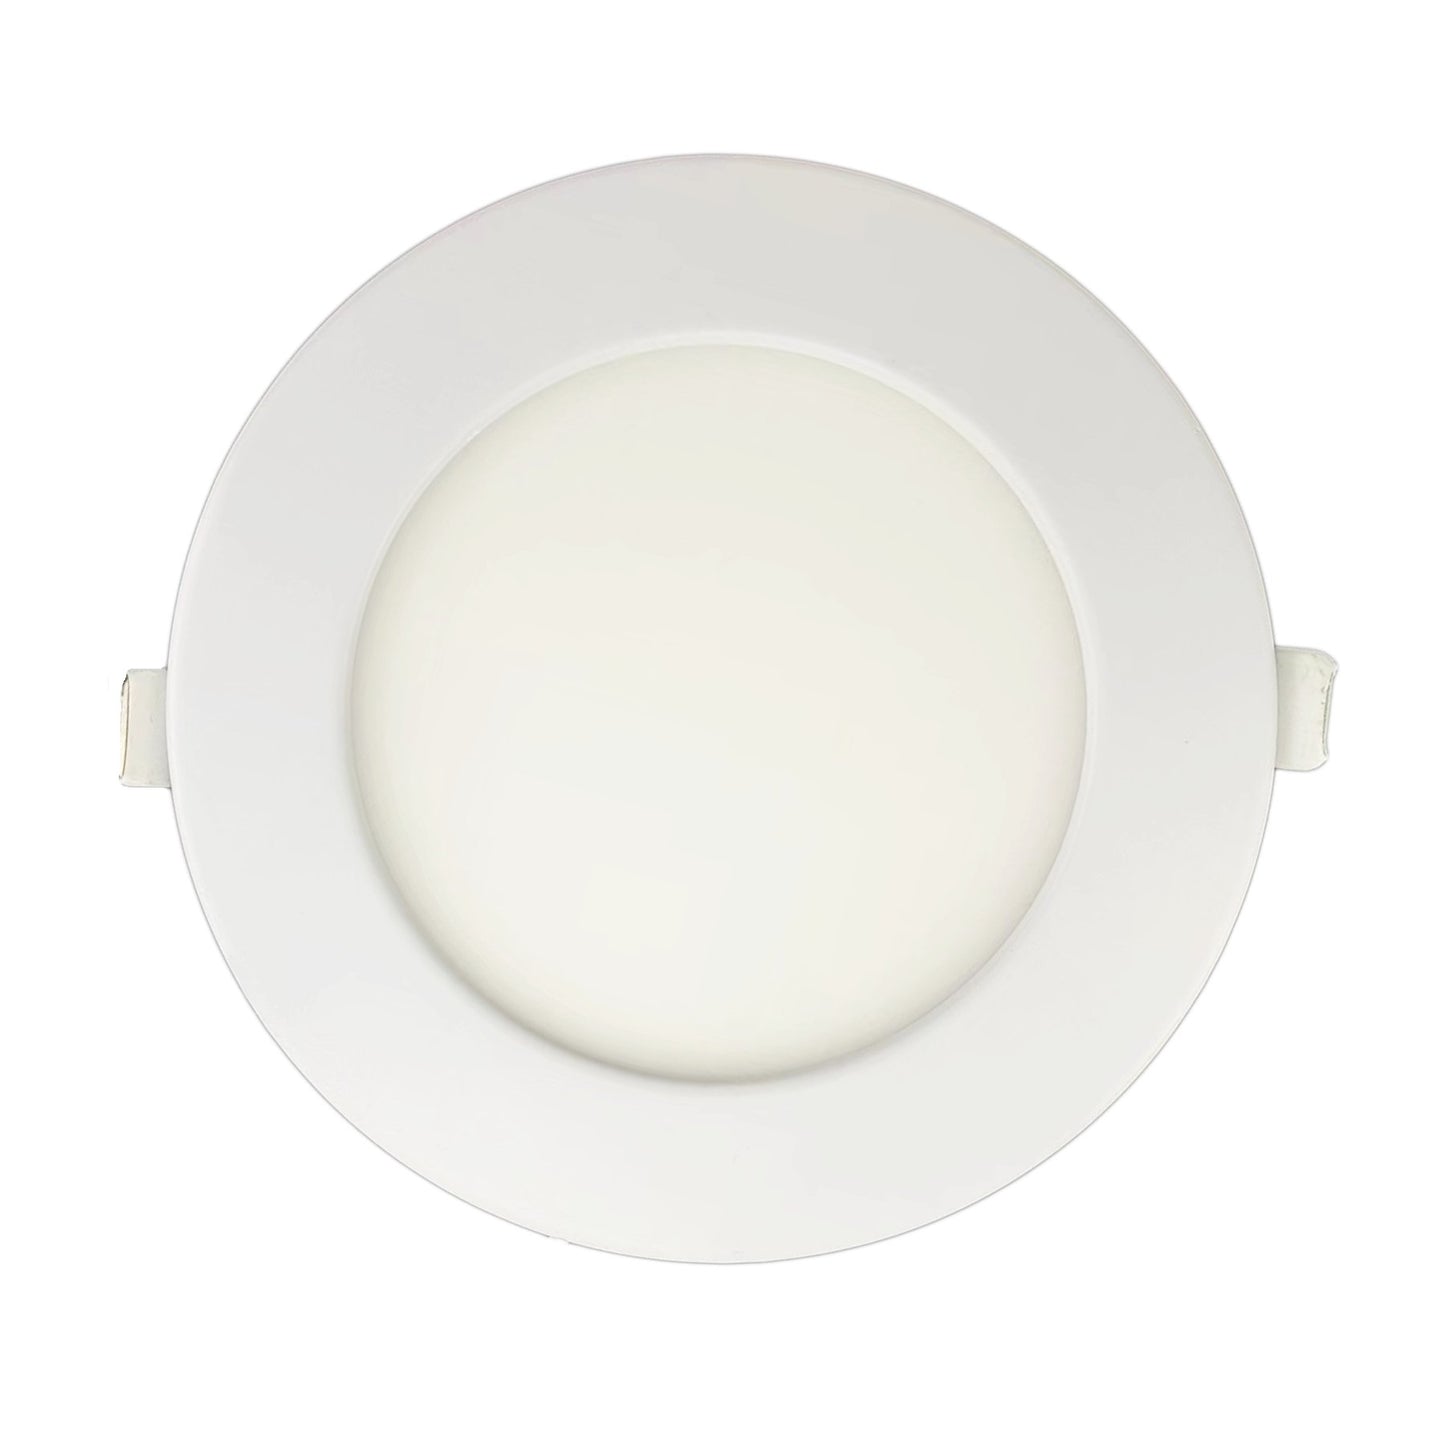 GDL-G96923Goodlite G-96923 5" 15W LED Round Recessed Slim Spotlight Selectable CCT Fire Rated